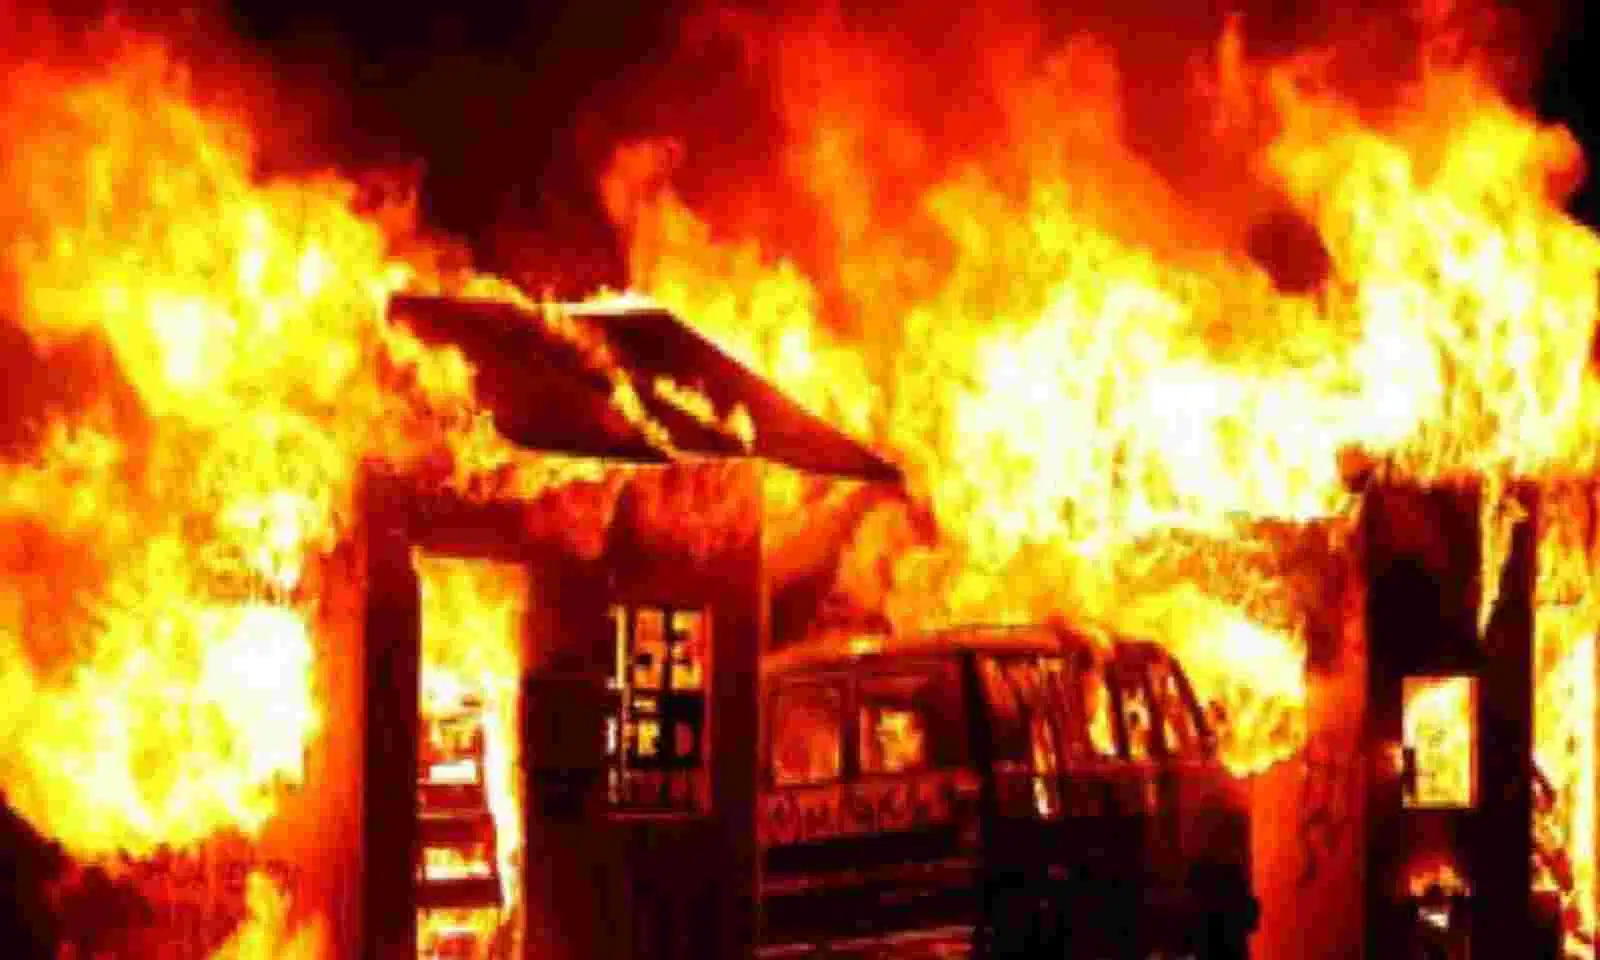 Fire Guts Olowu Spare Parts Market In Lagos